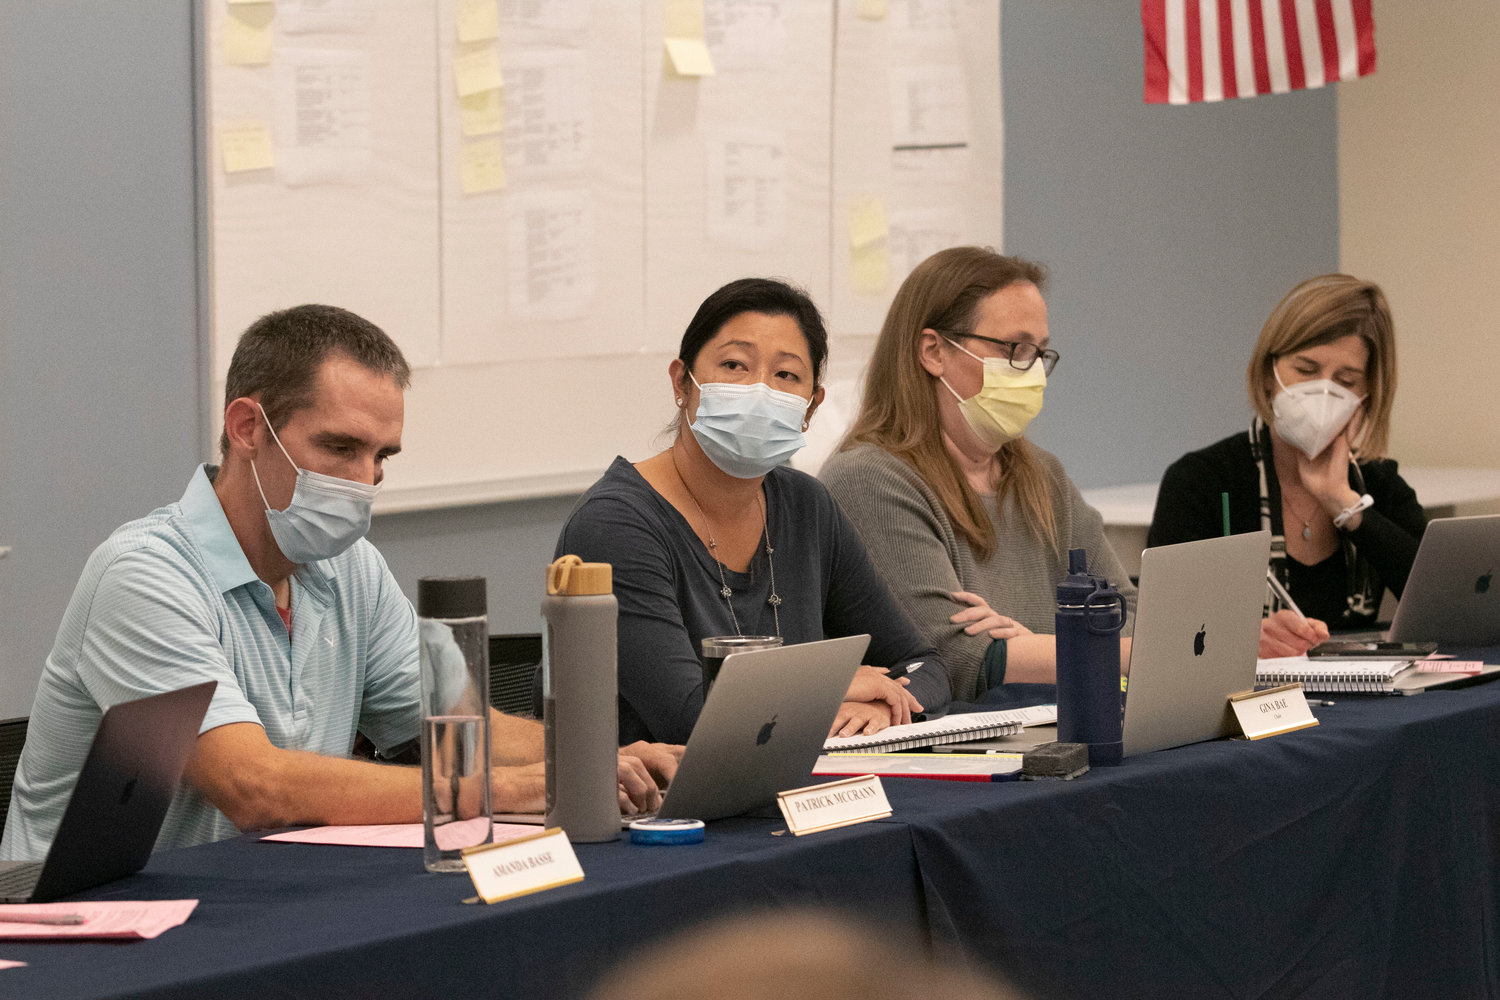 Barrington School Committee members Patrick McCrann, Gina Bae, Megan Douglas and Erika Sevetson (from left to right) are shown during the Oct. 7 meeting.